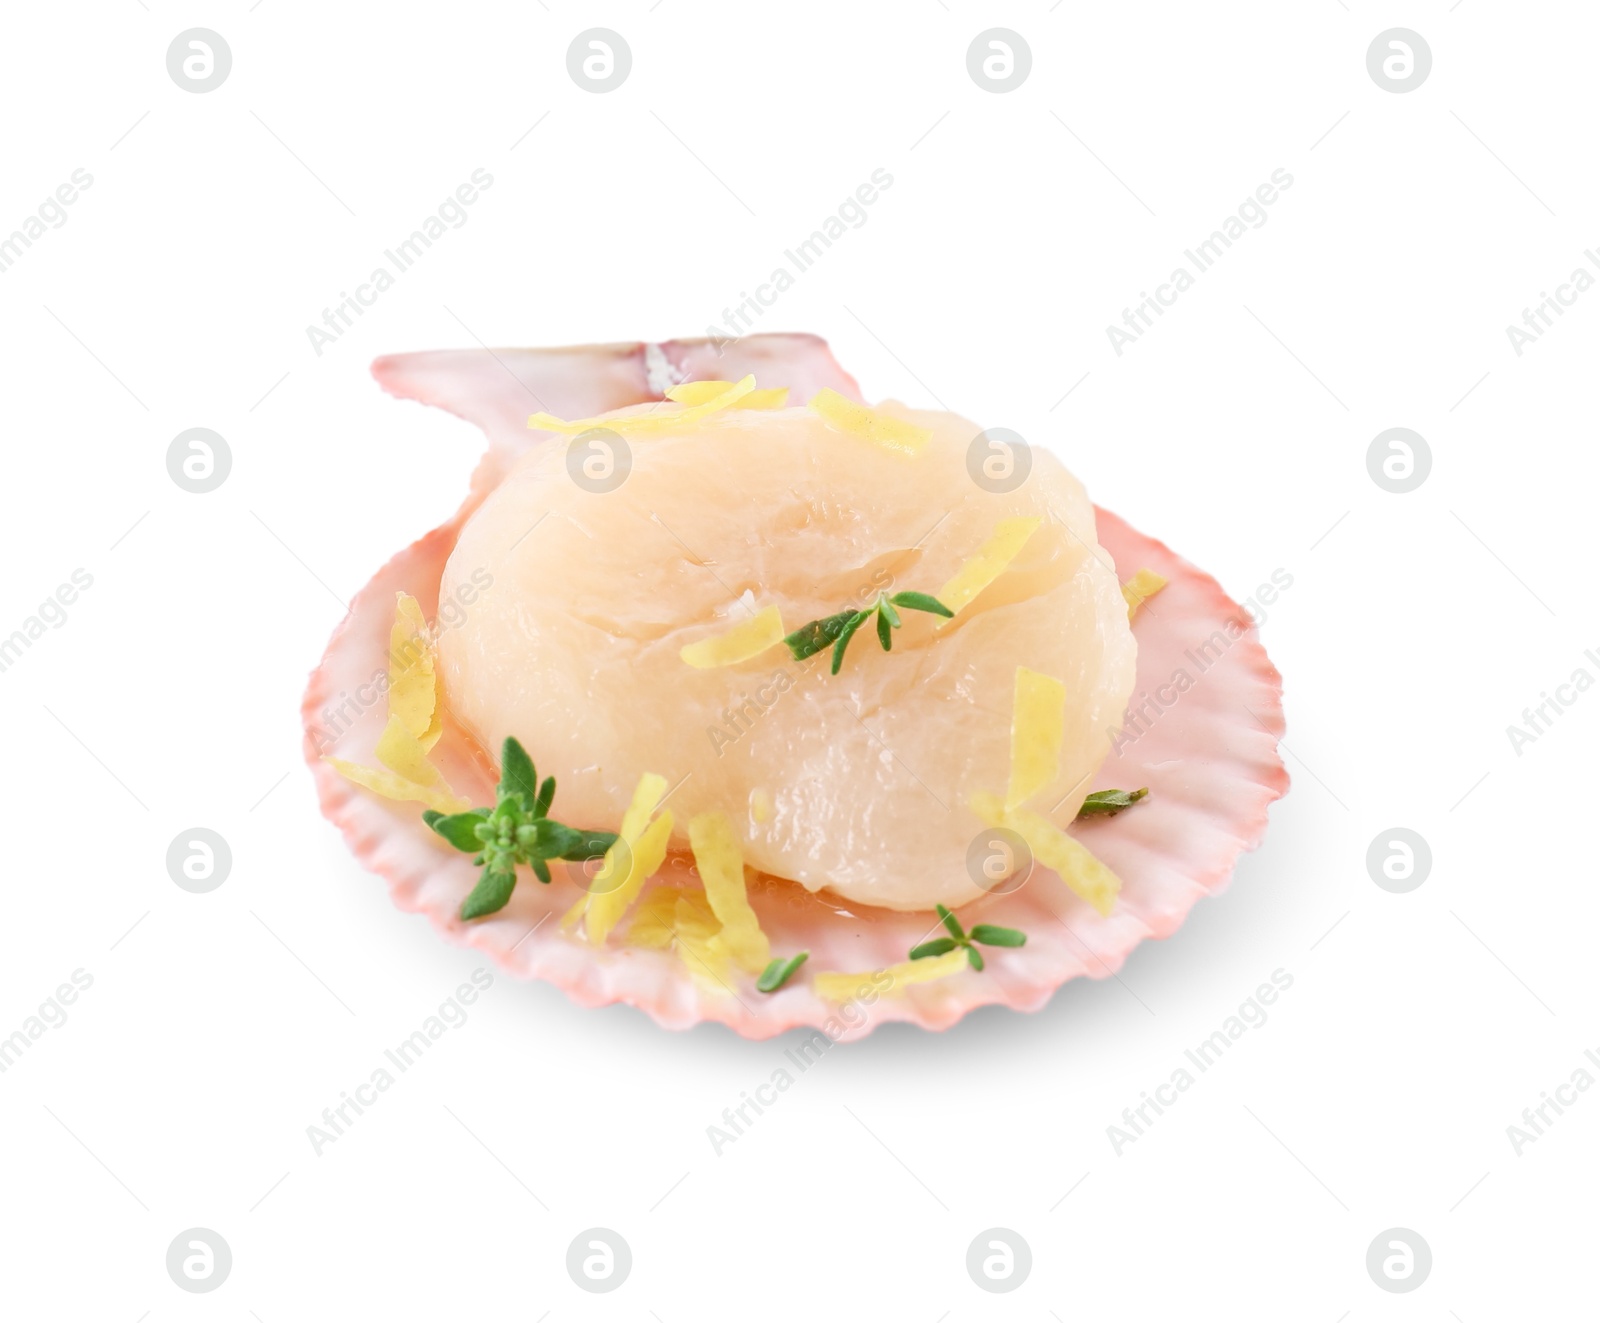 Photo of Raw scallop with lemon zest, thyme and shell isolated on white